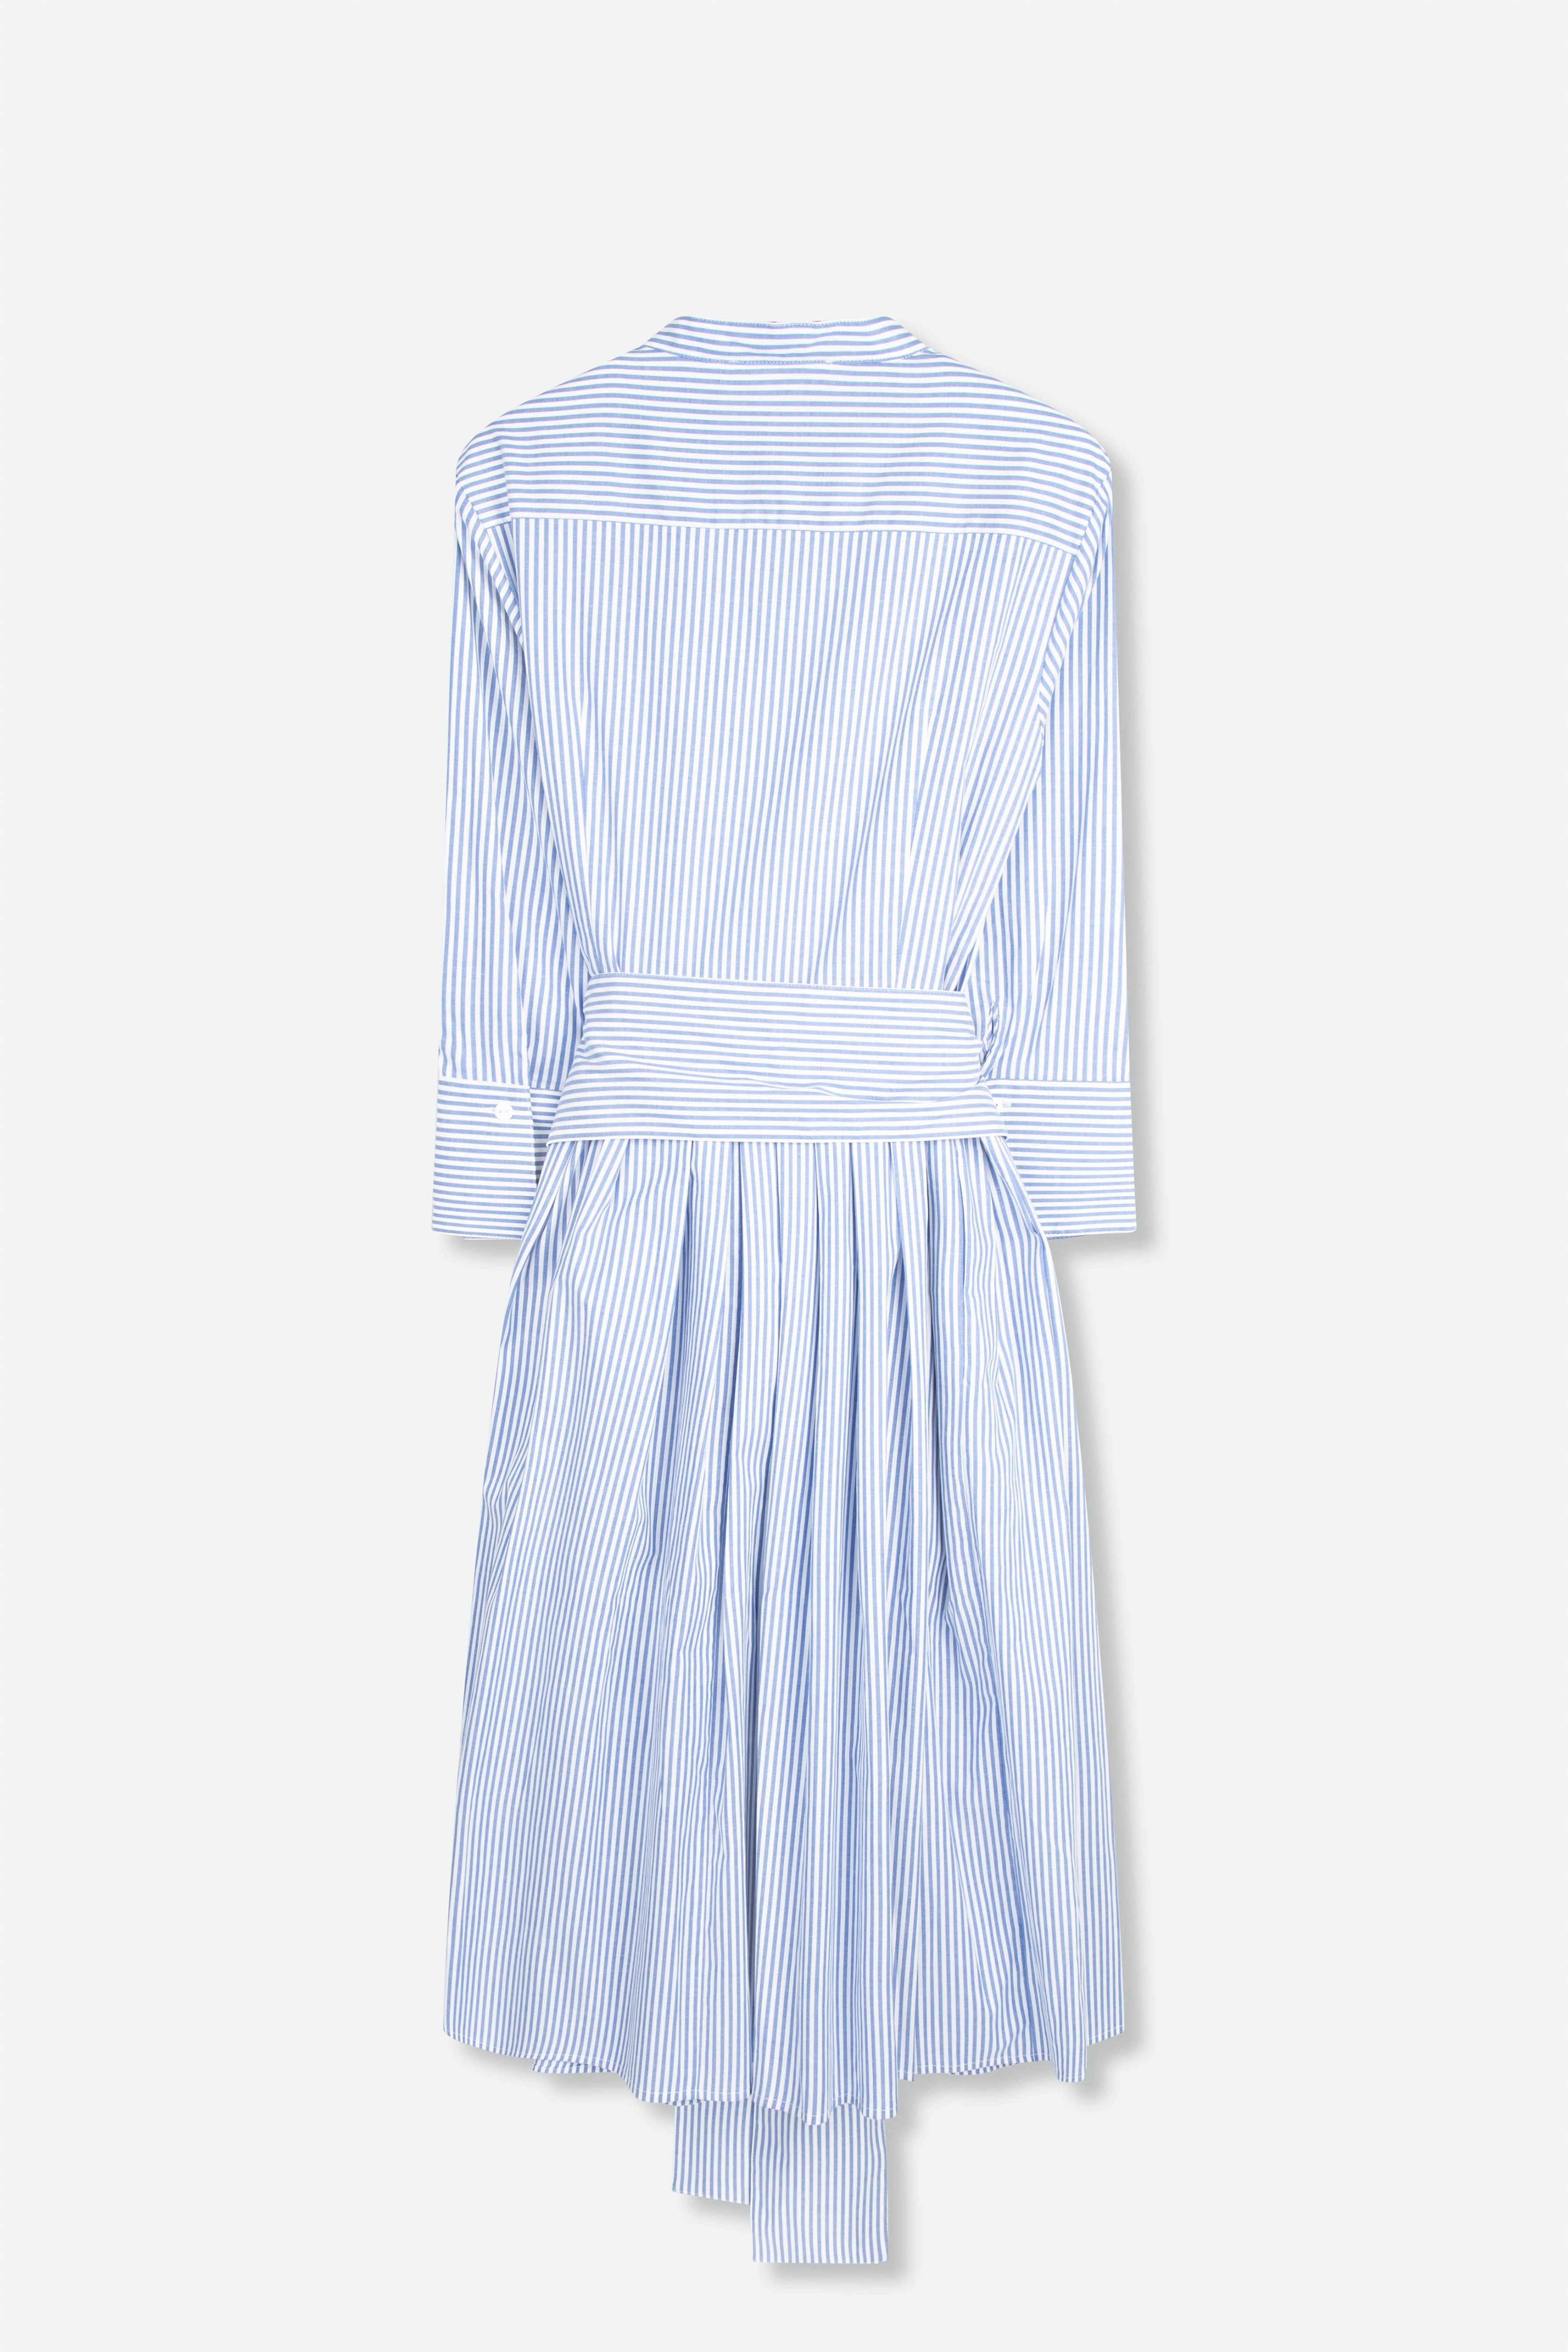 DARA PLEATED SKIRT COLLAR DRESS WITH SASH IN ITALIAN COTTON STRETCH - Jarbo